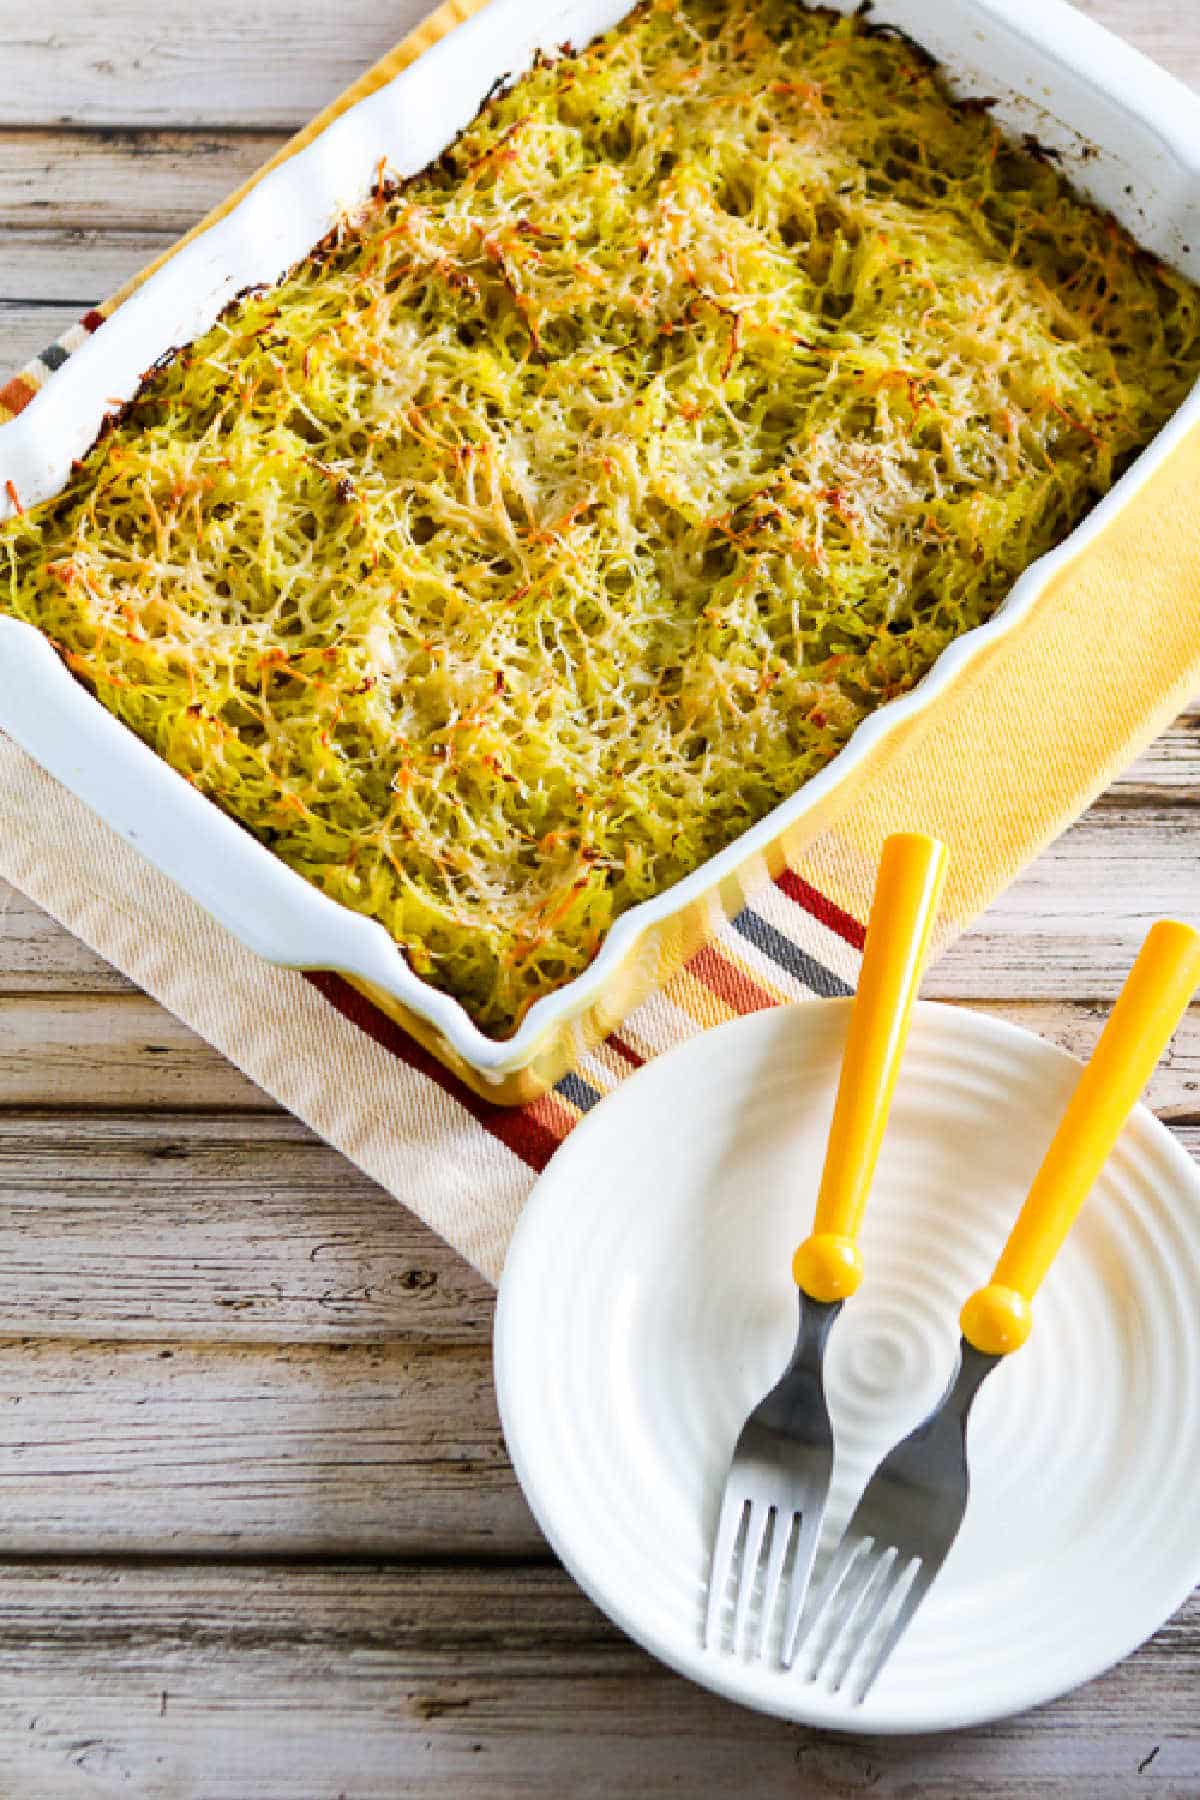 Baked squash spaghetti with pesto in a serving dish with plates and forks